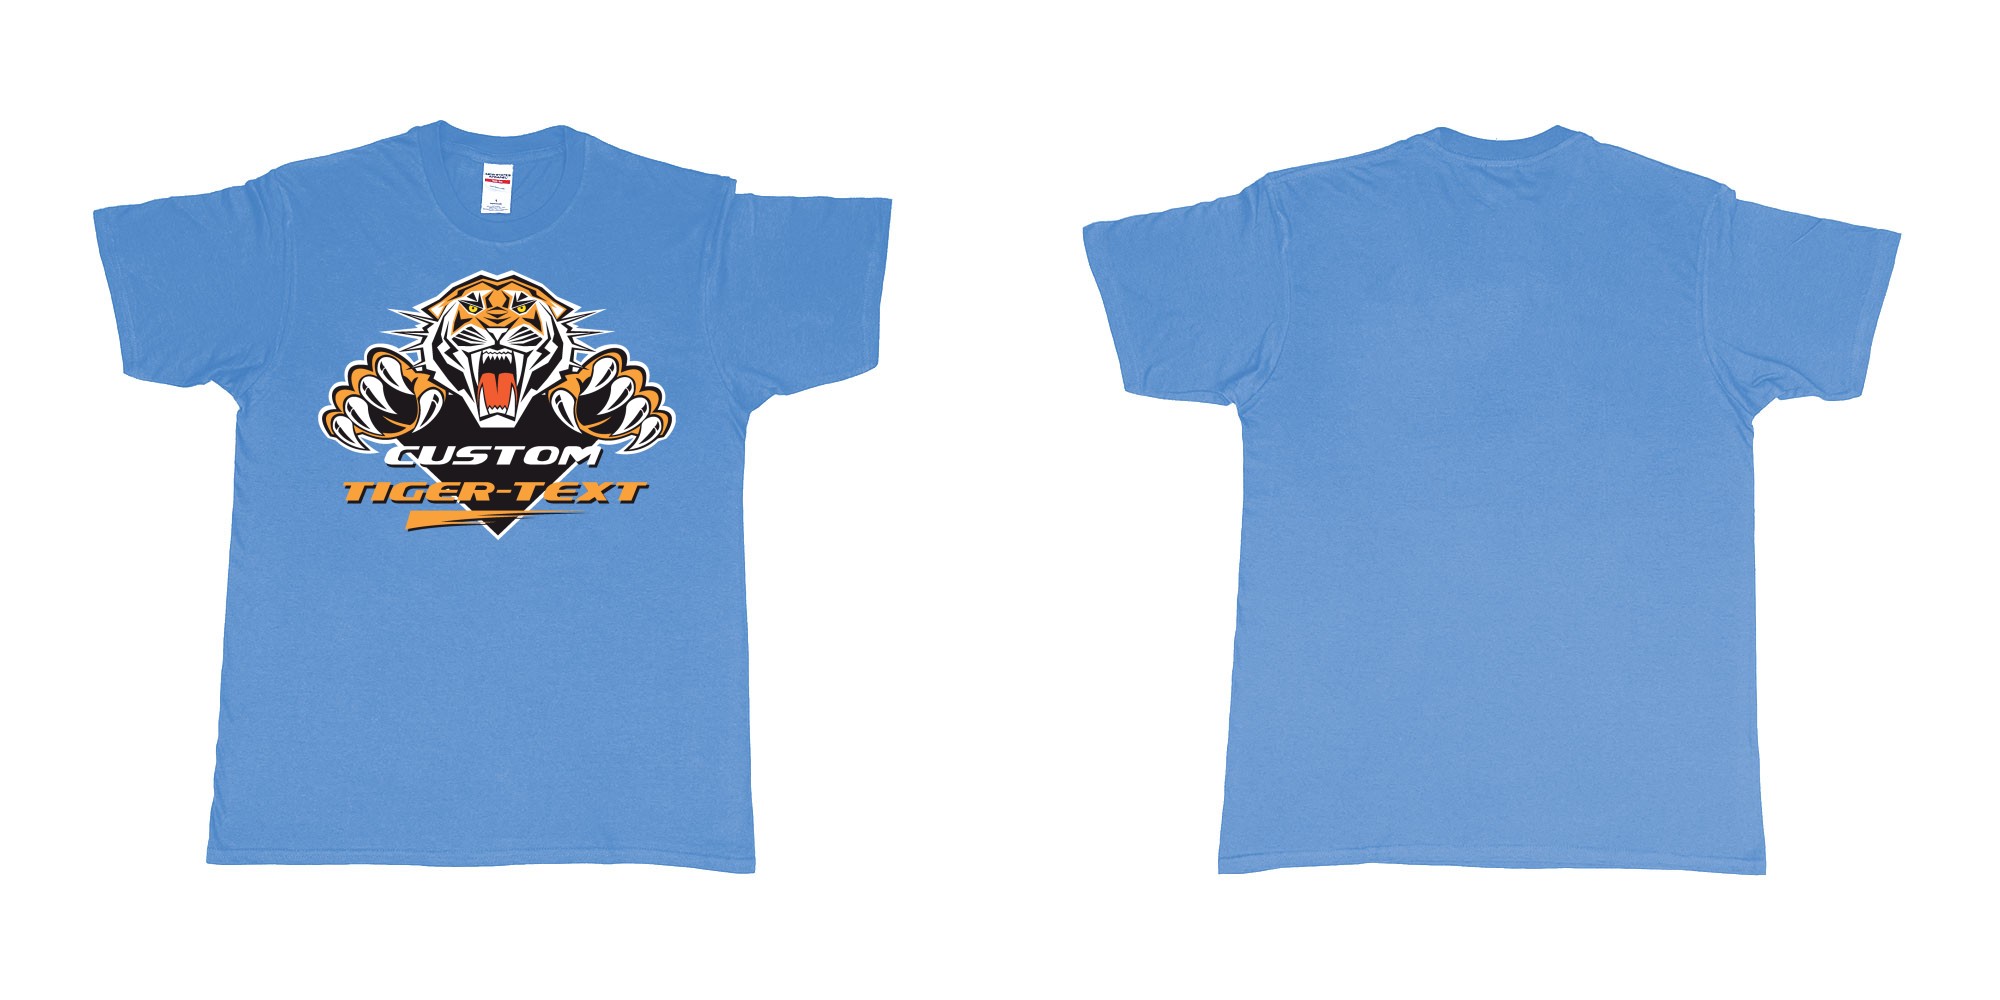 Custom tshirt design the wests tigers sydney national rugby league custom tshirt print in fabric color carolina-blue choice your own text made in Bali by The Pirate Way